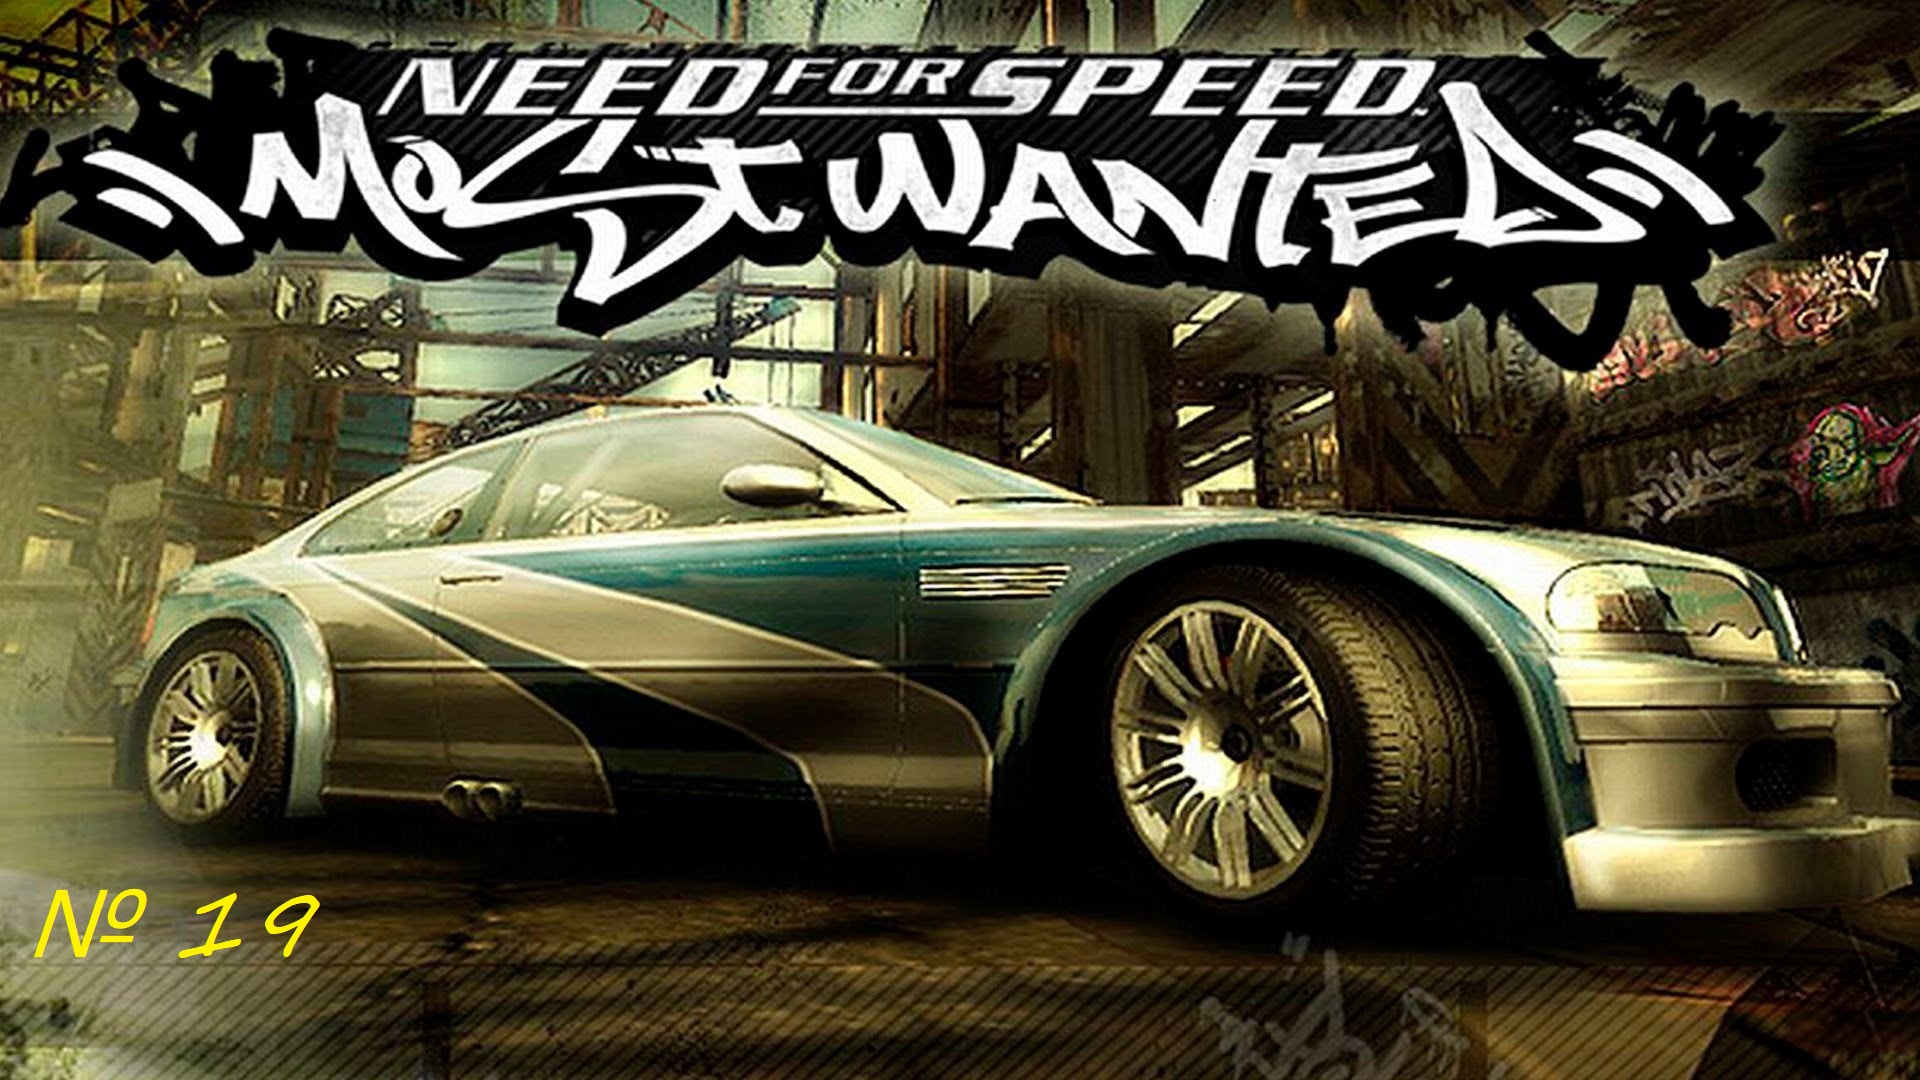 Nfs most wanted 2005 стим (120) фото